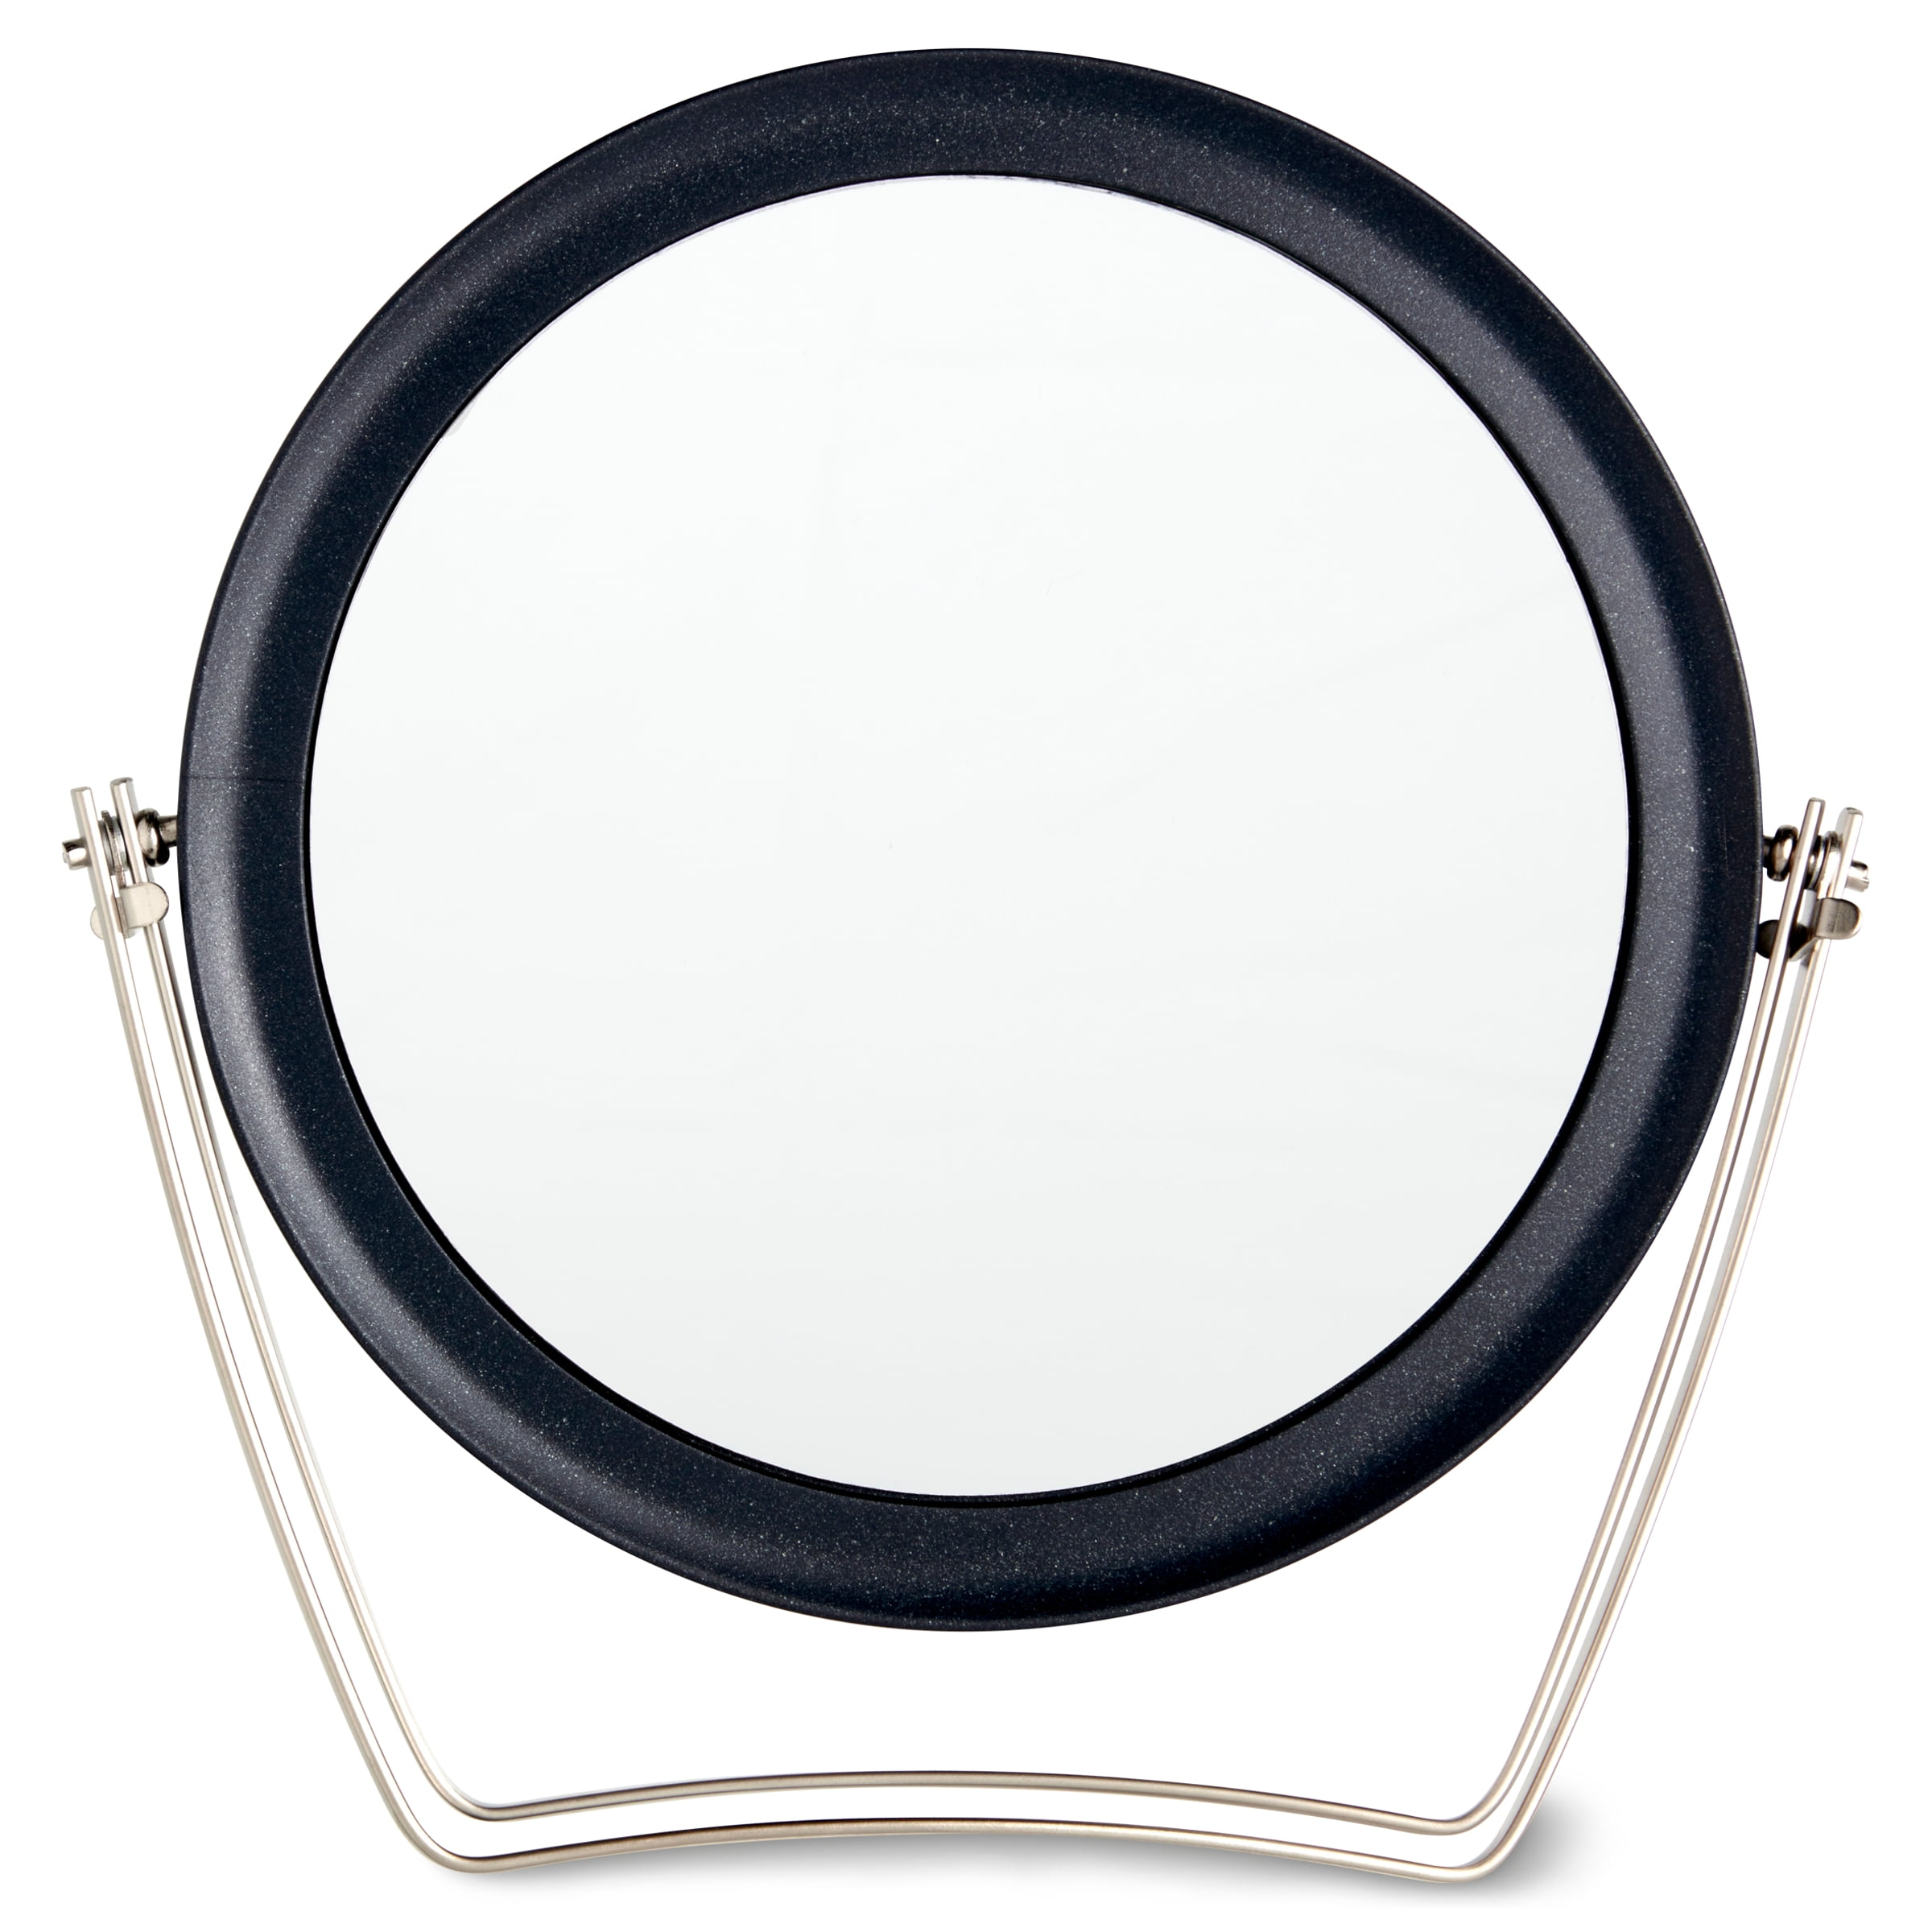 Equate Beauty Round Mirror with Stand, 1x and 3x Magnification